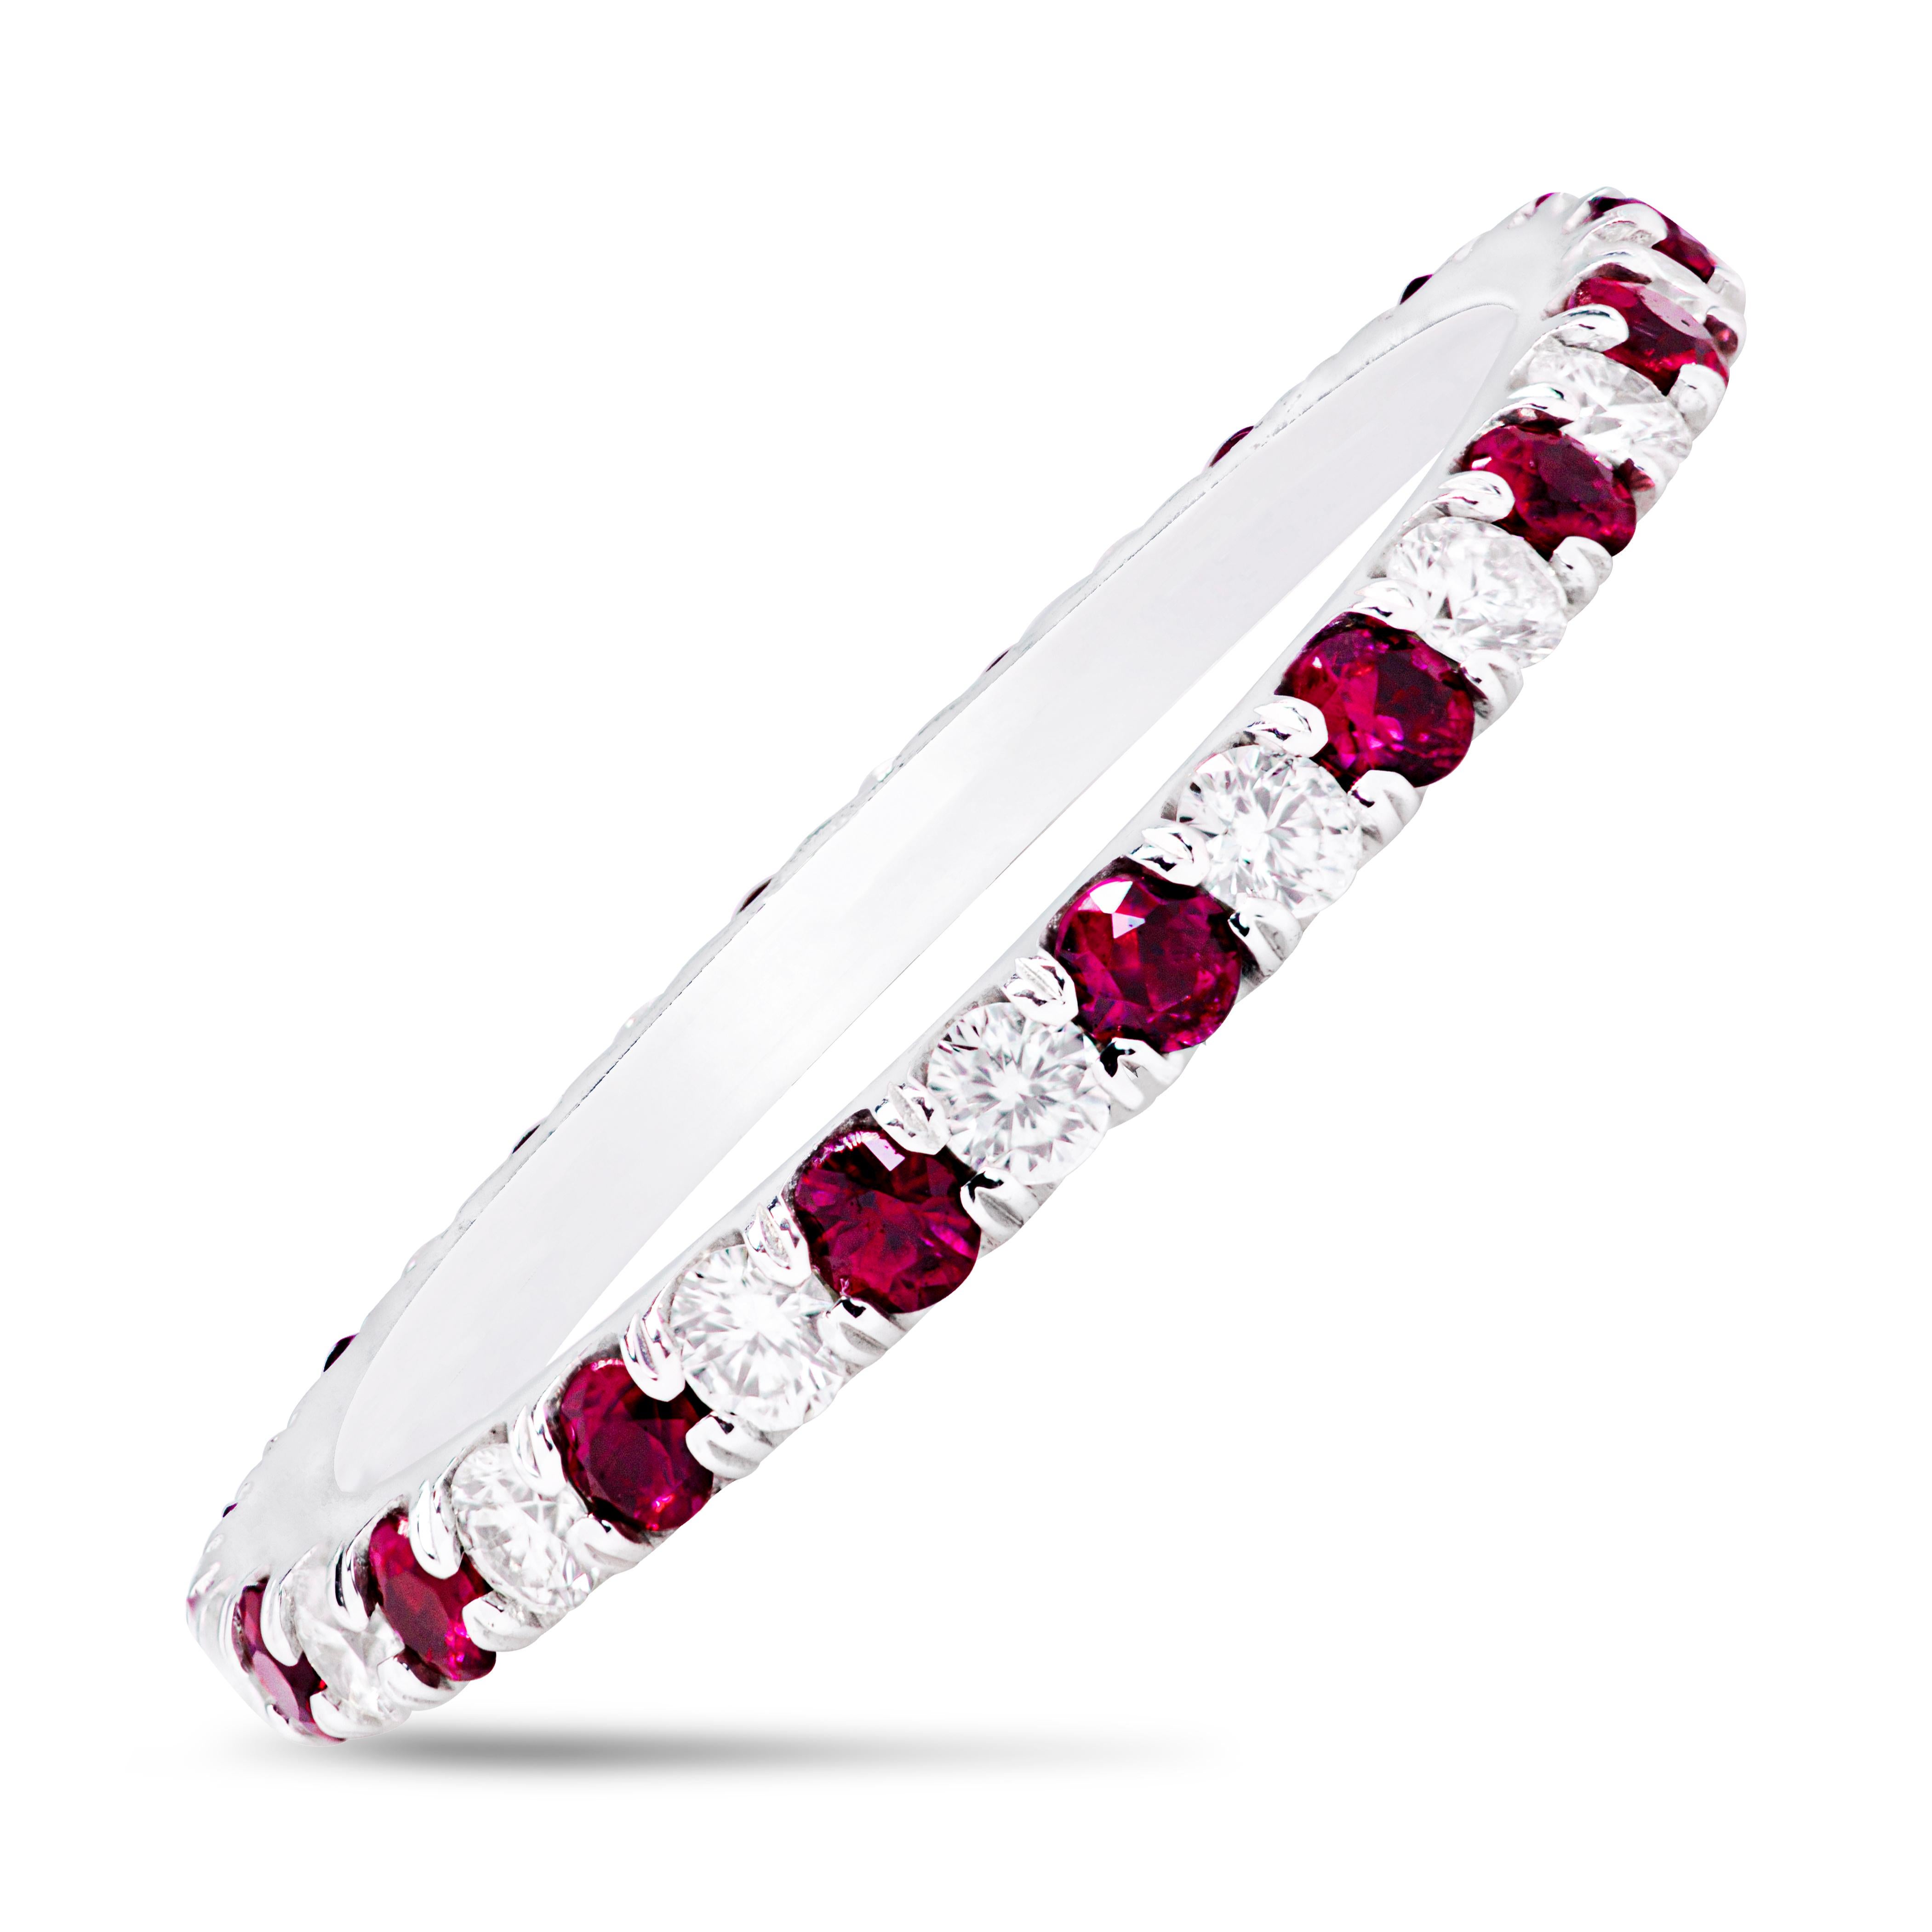 This wedding band features 18 natural rubies of 0.44 carats, alternating with 18 round brilliant diamonds of 0.34 carats. The stones weigh 0.78 carats total. Set in 18K white gold. Size 6.5 US. 

Roman Malakov is a custom house, specializing in